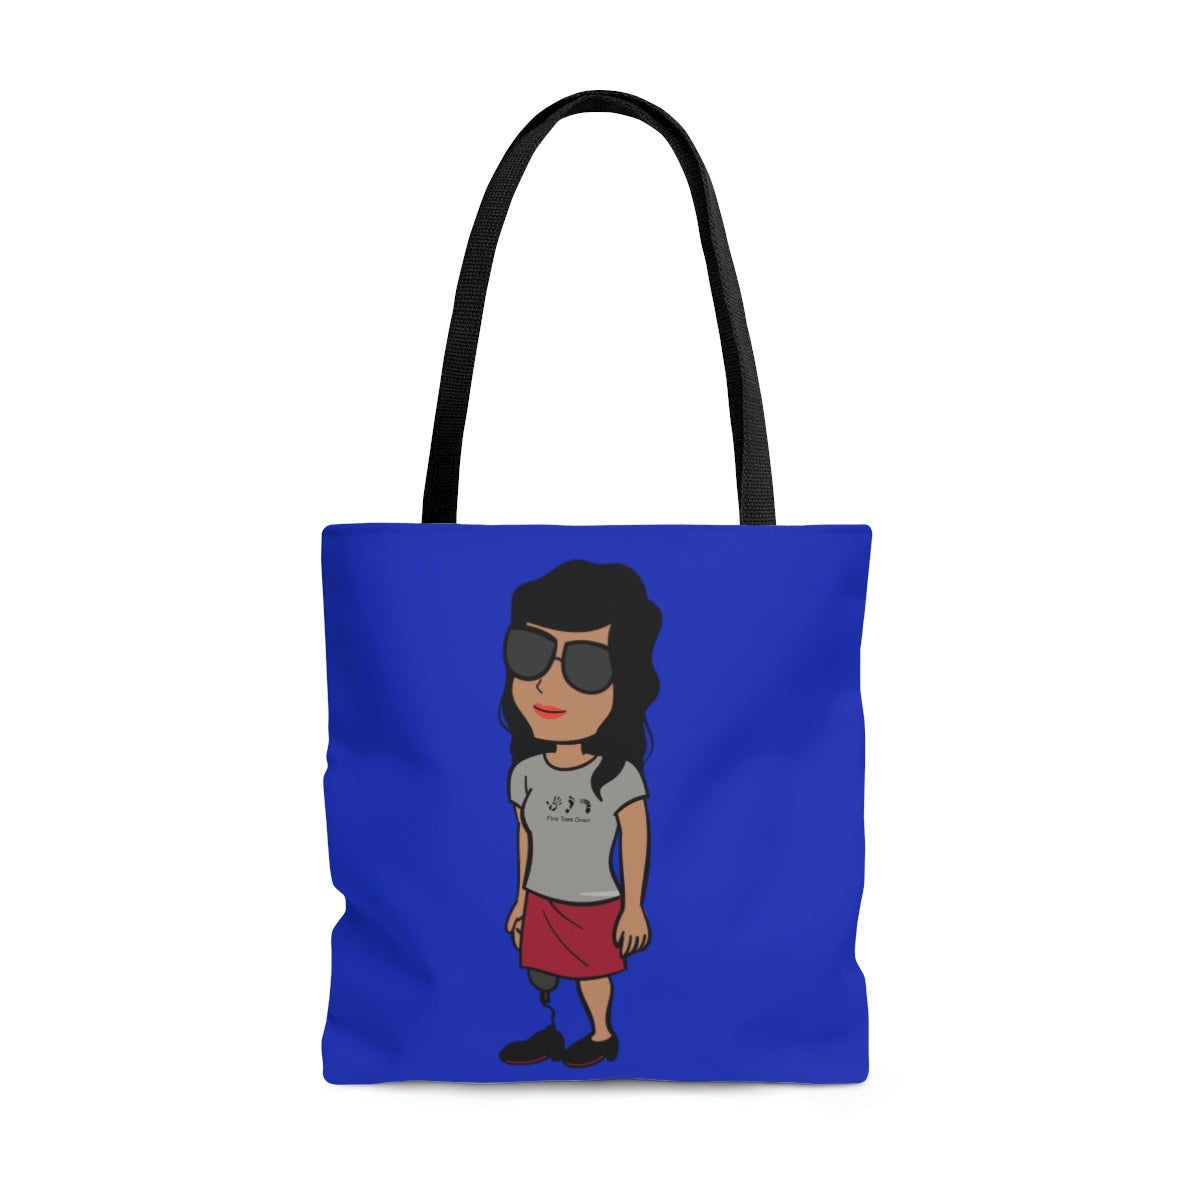 Five Toes Down Power Team Tote Bag